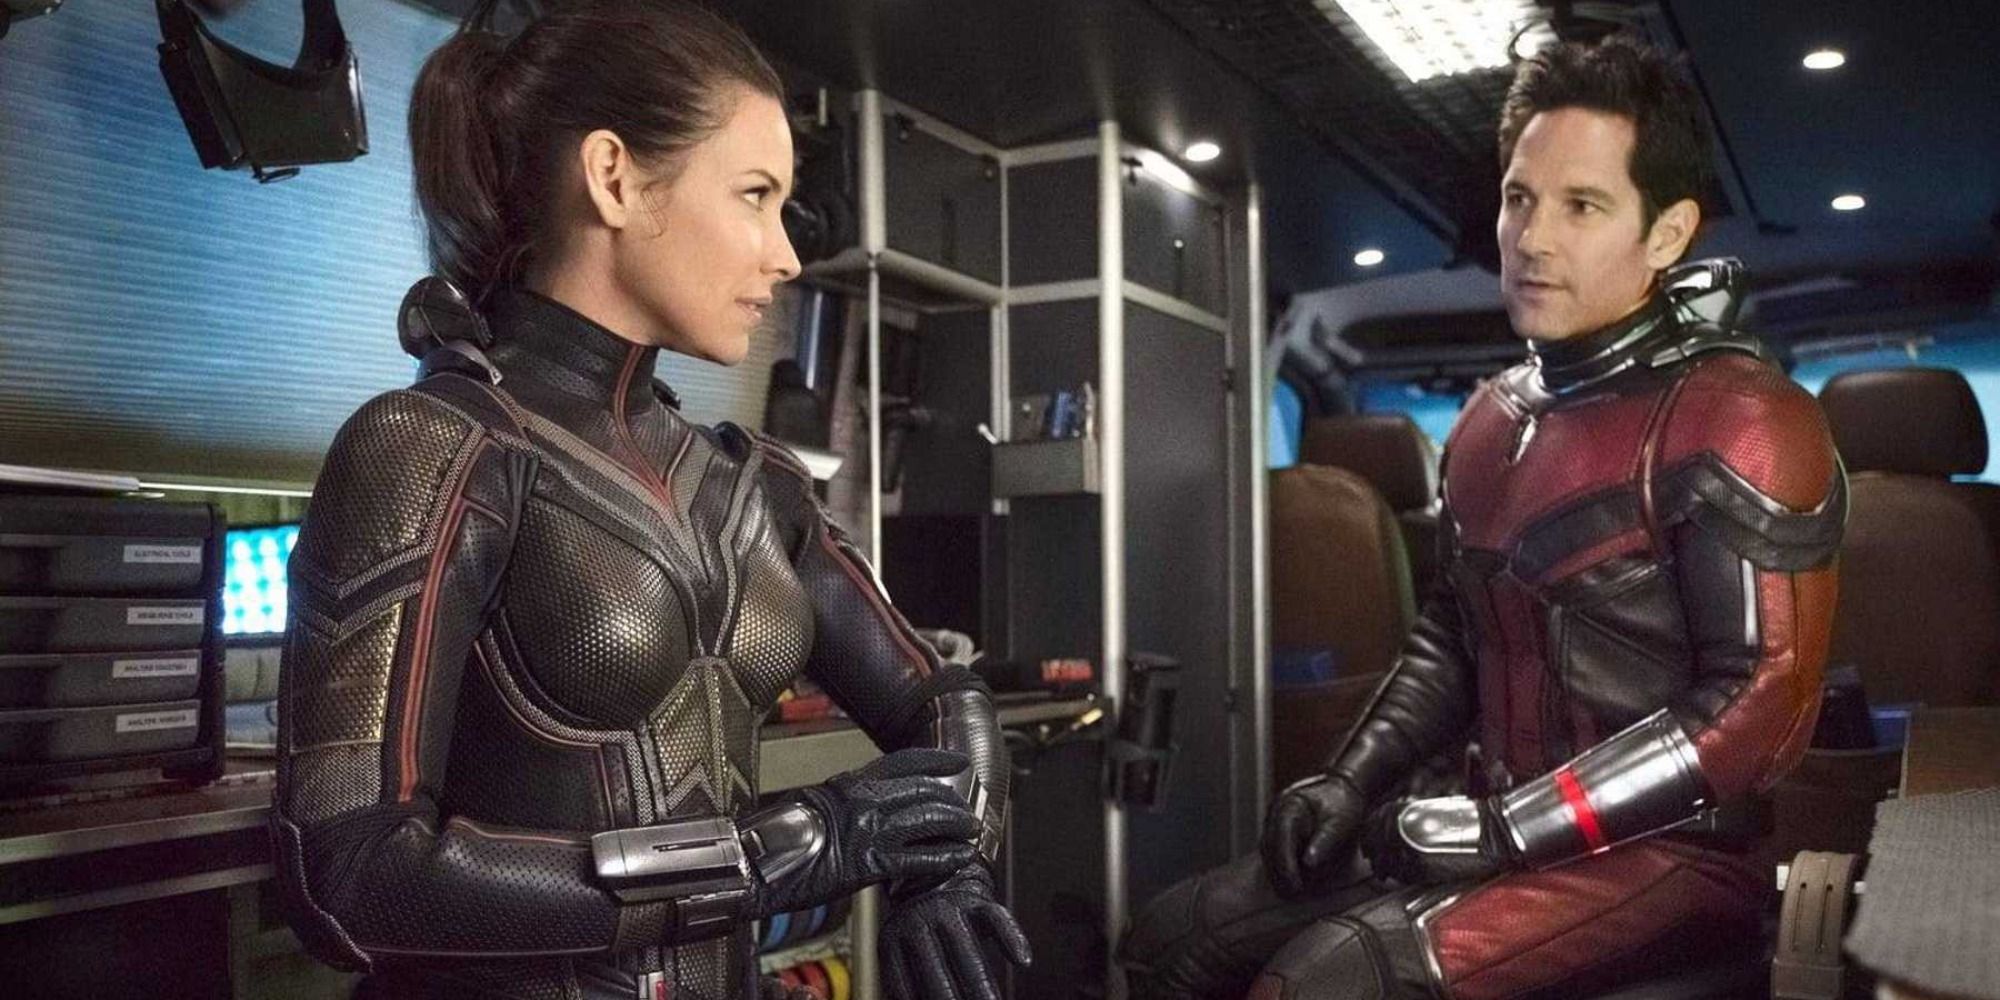 Fully-suited Ant-Man and The Wasp talking in the 2018 movie